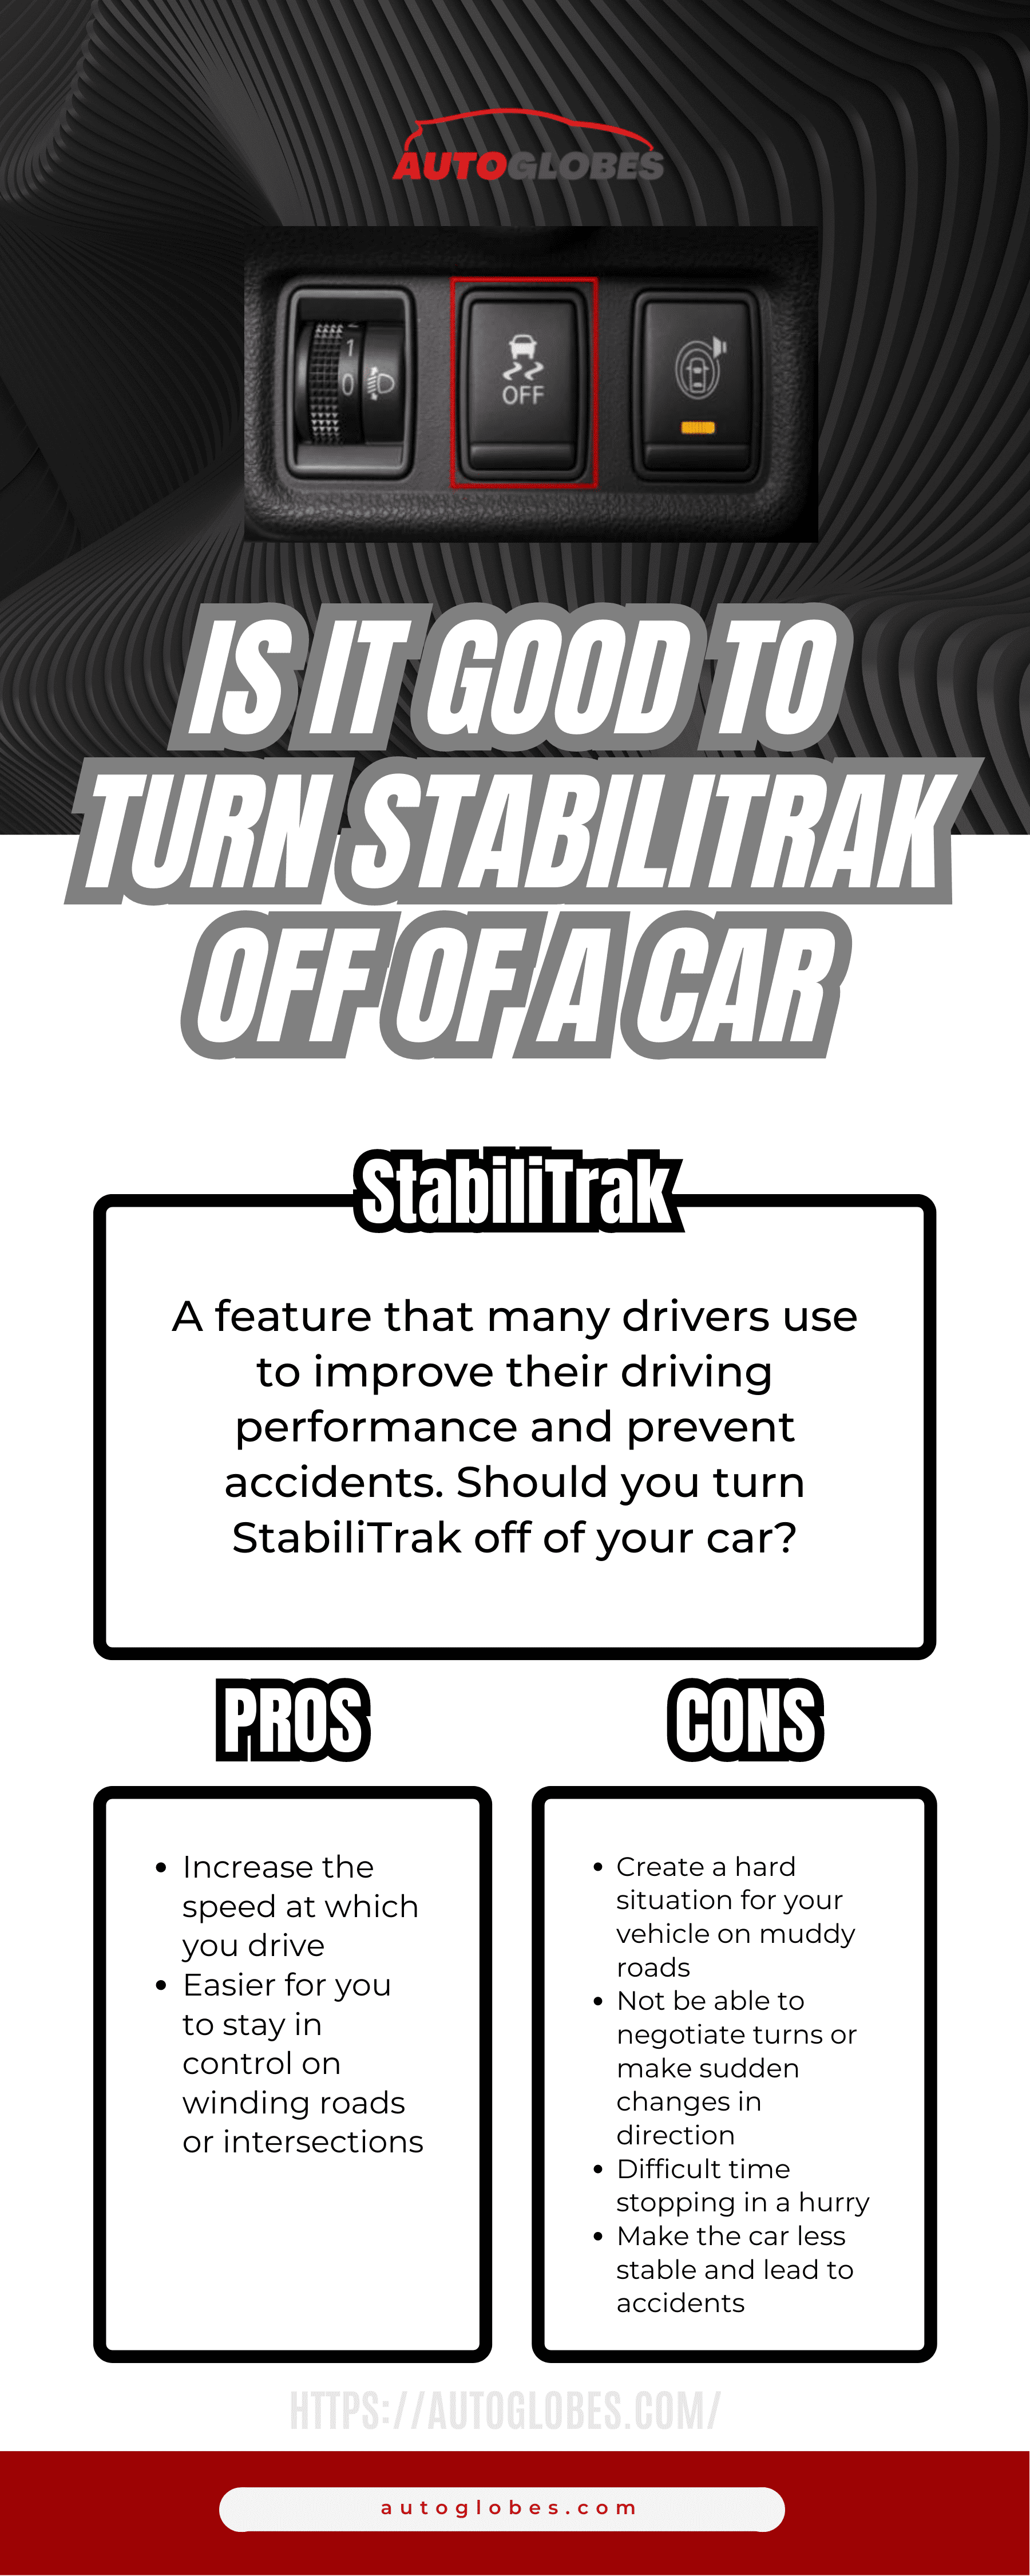 Is It Good To Turn StabiliTrak Off Of A Car Infographic